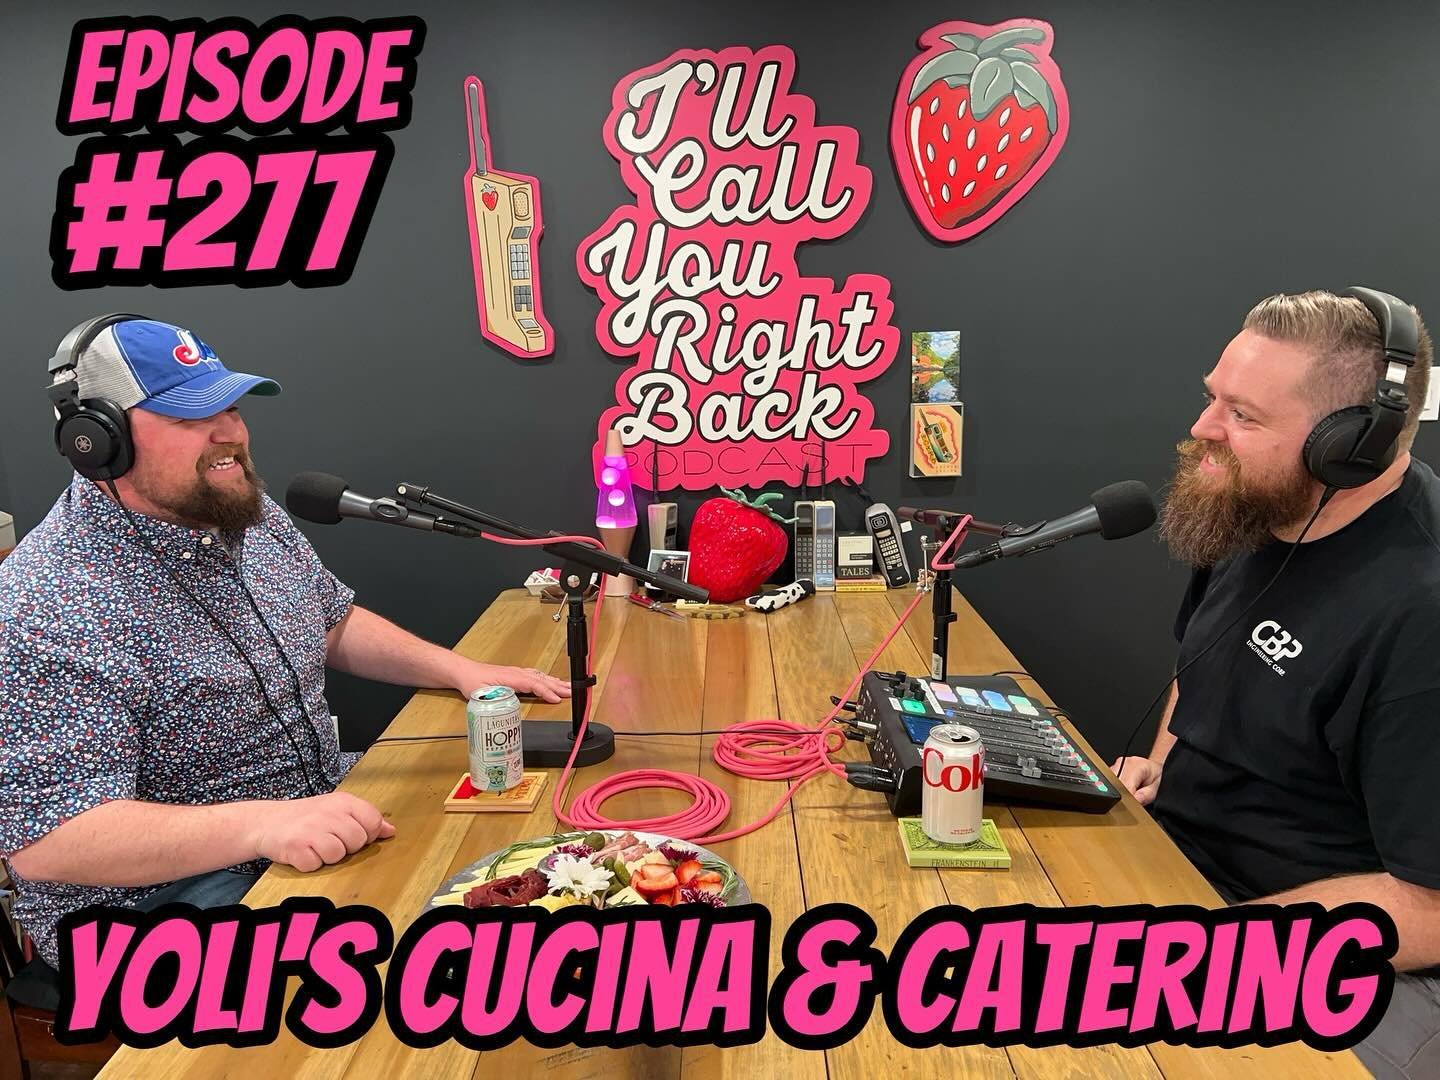 This week, I sit down with my brother @bennybizness of @yoliscucina and @yoliscateringpgh. Ben Bartilson is a dad, husband, chef, and all around great human being. Ben owns an incredible Italian restaurant in Jefferson Hills called @yoliscucina. At Y